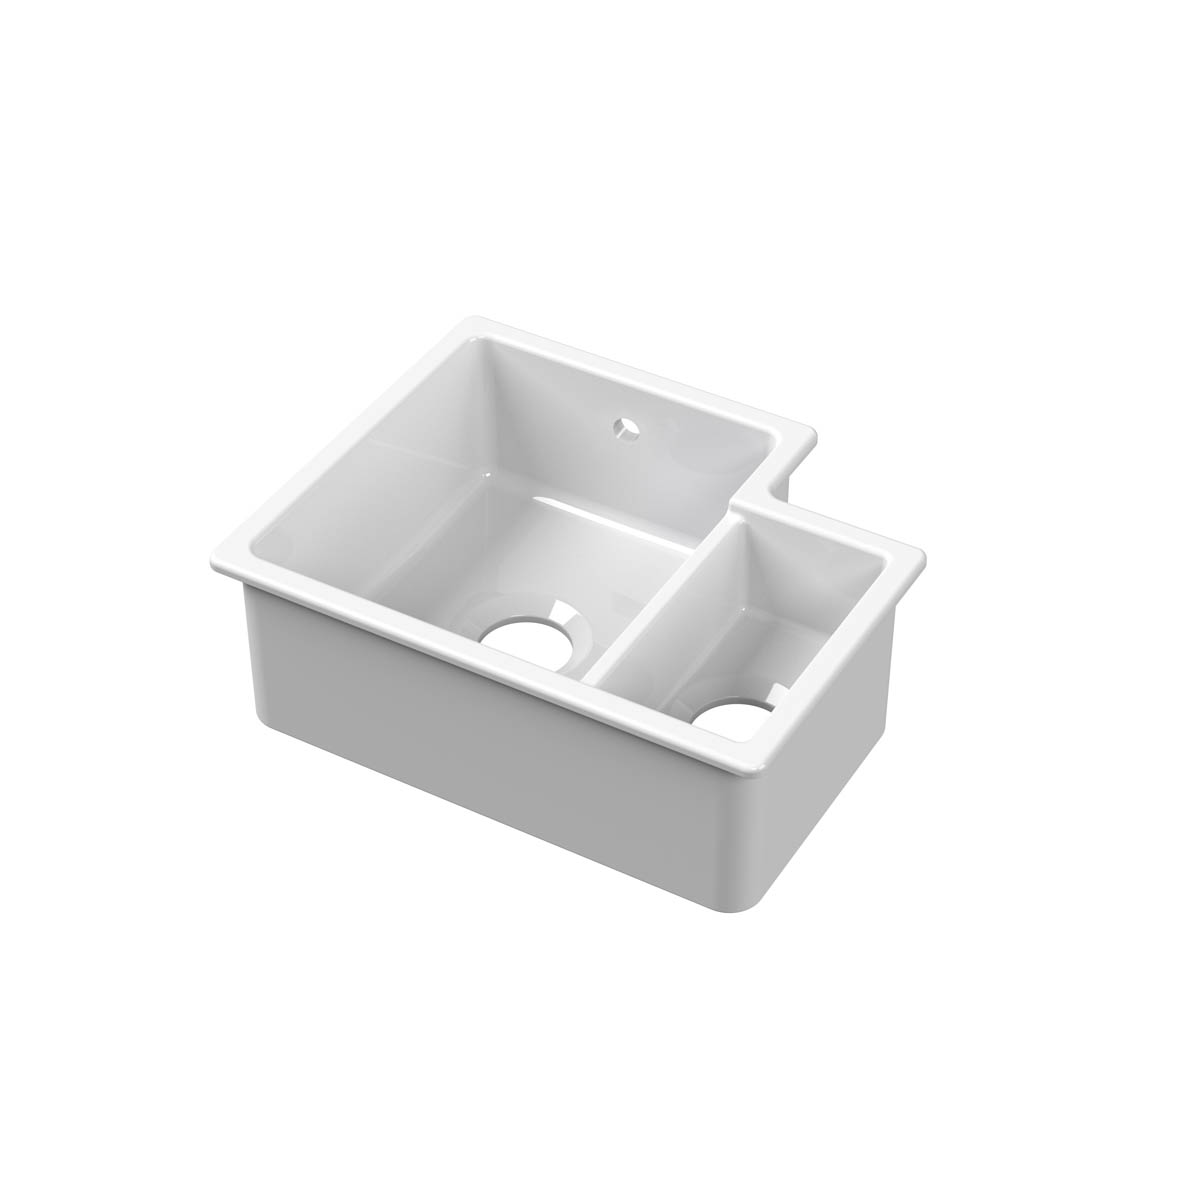 Nuie 549x441x195mm Inset or Undermount Left Hand 1.5 Bowl Sink with 90mm Central Waste & Overflow - White (20325)